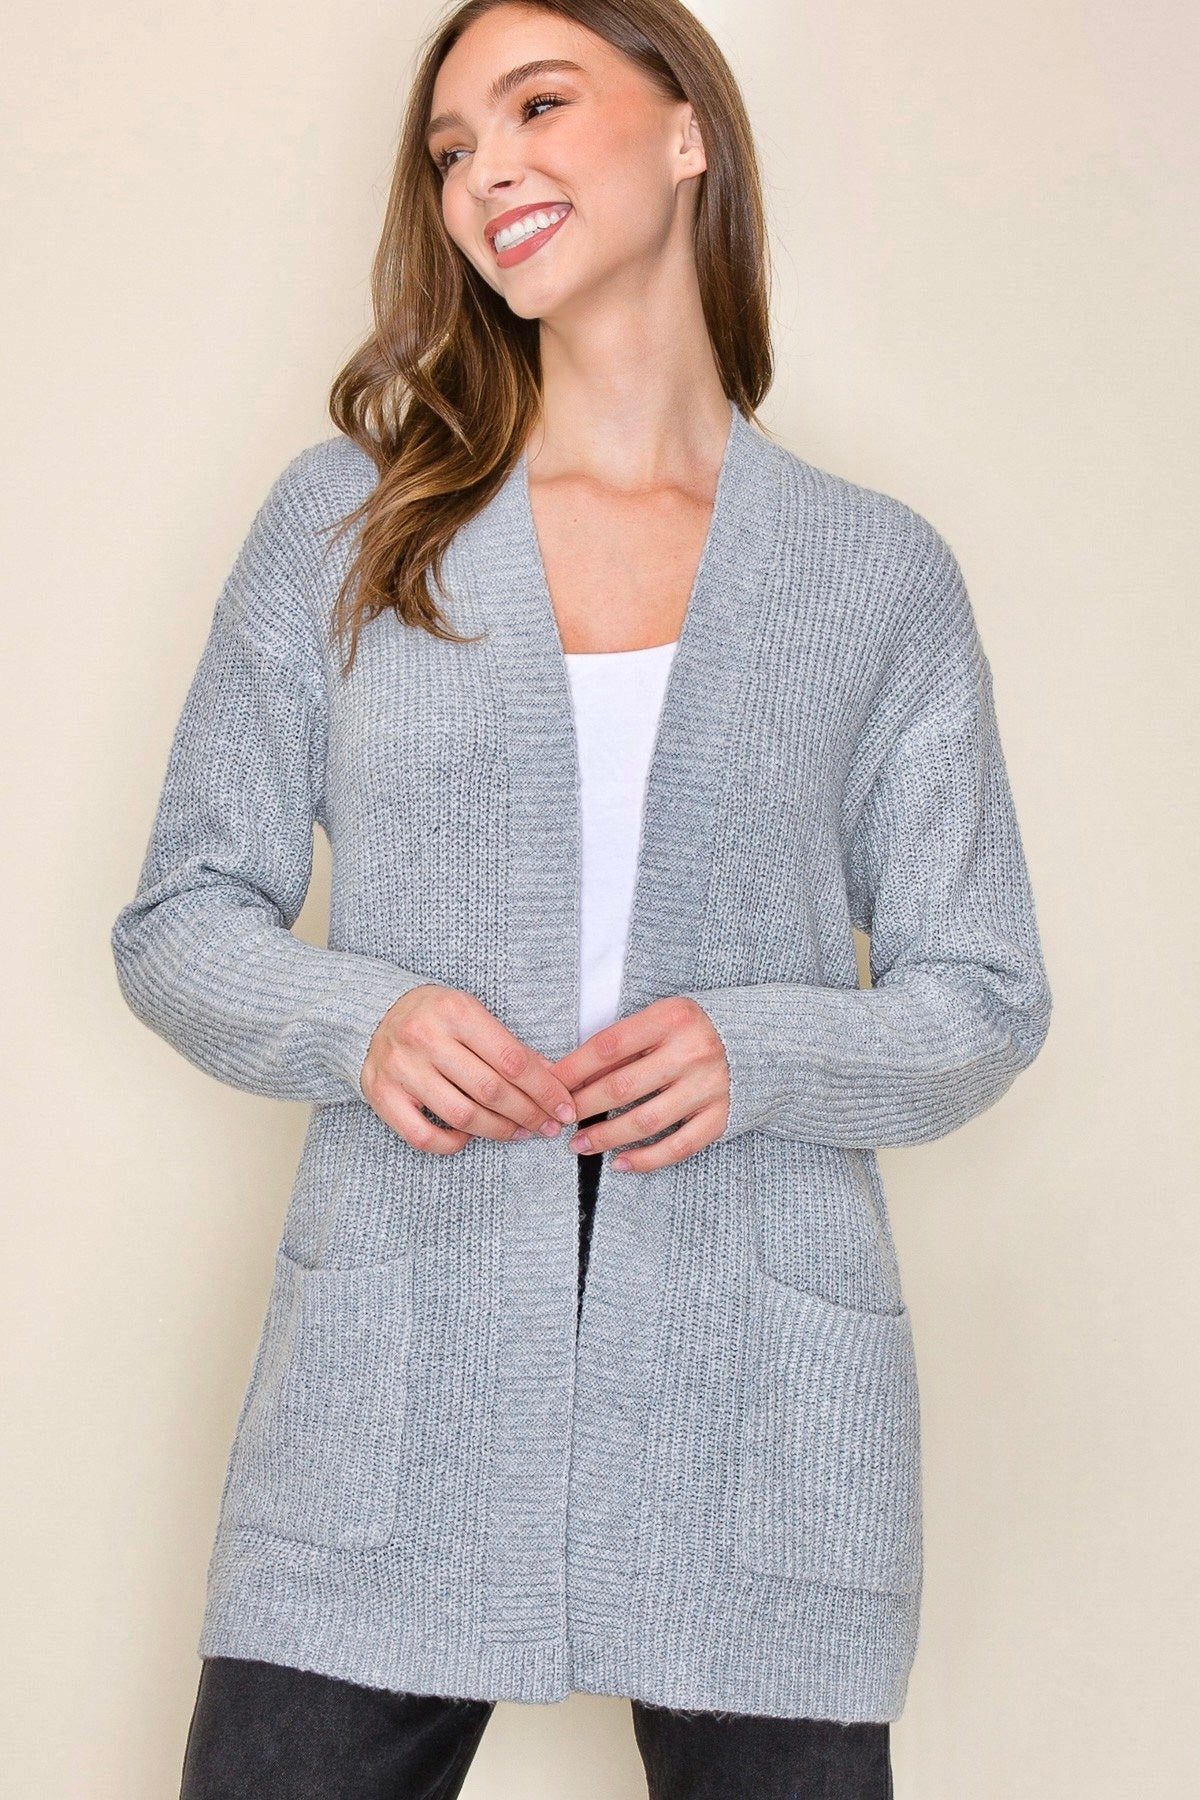 HEATHERED GREY OPEN FRONT POCKET SWEATER CARDIGAN